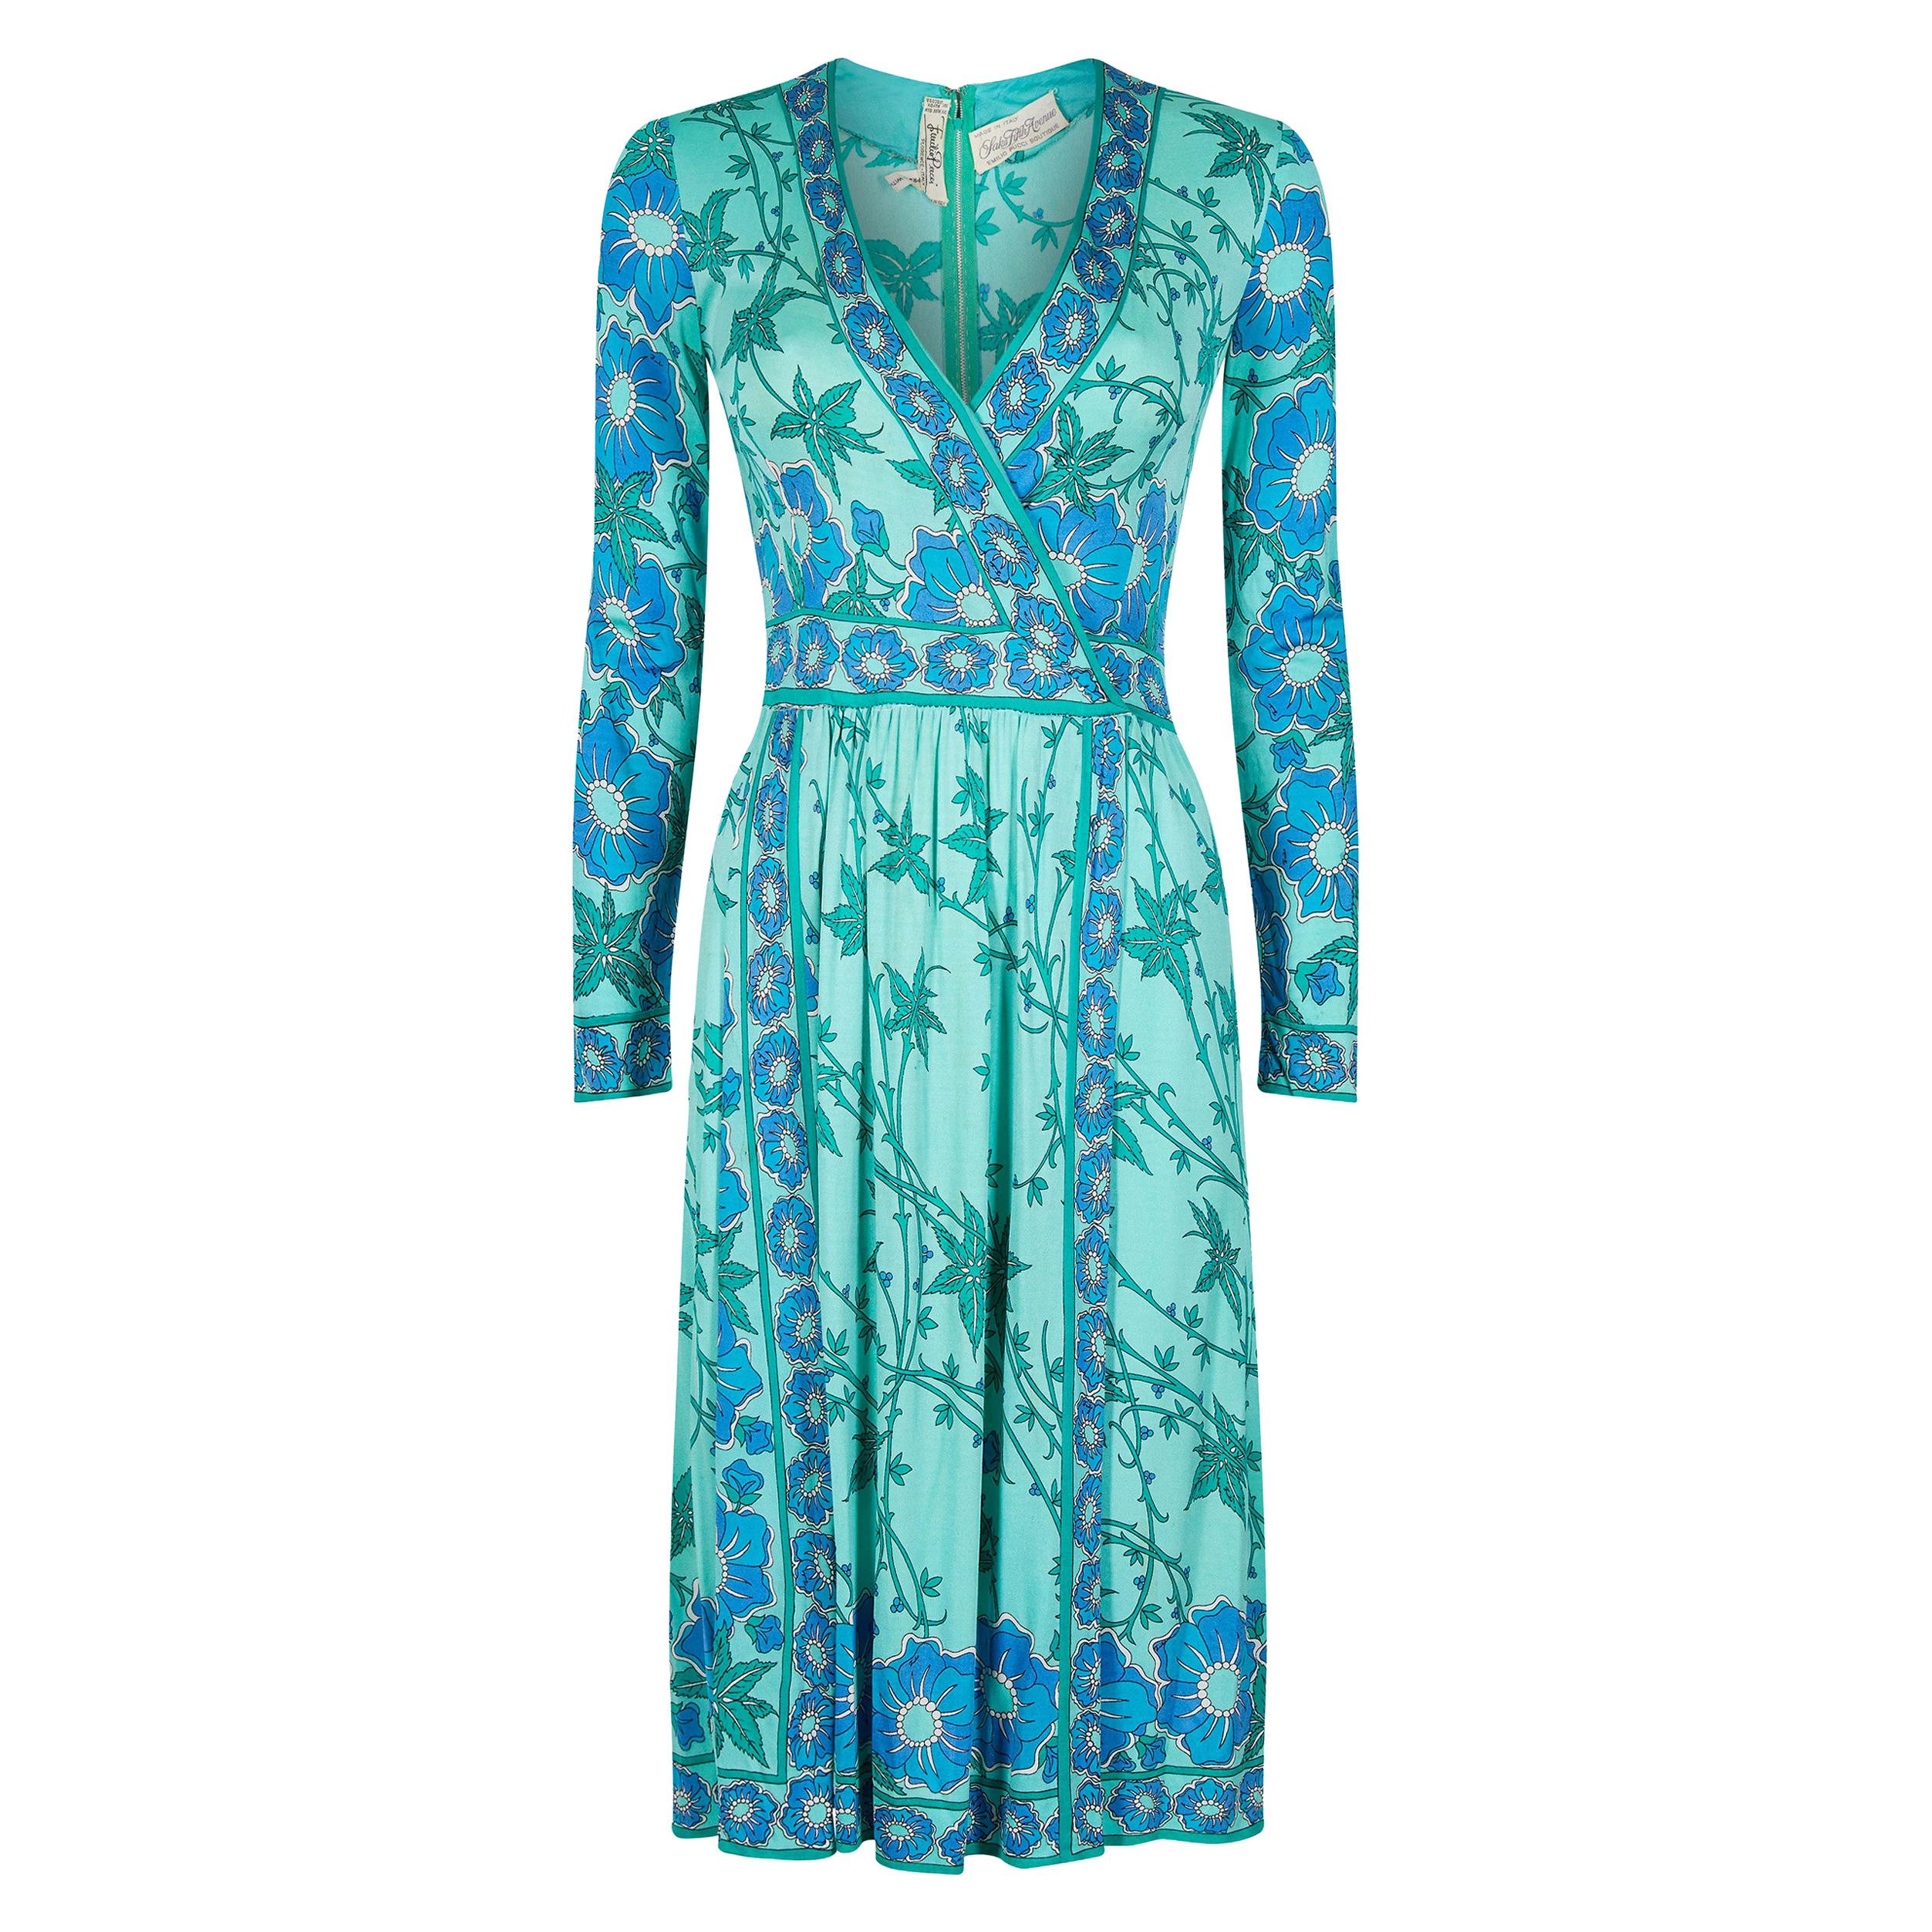 1970s Emilio Pucci Turquoise Silk Jersey Dress For Sale